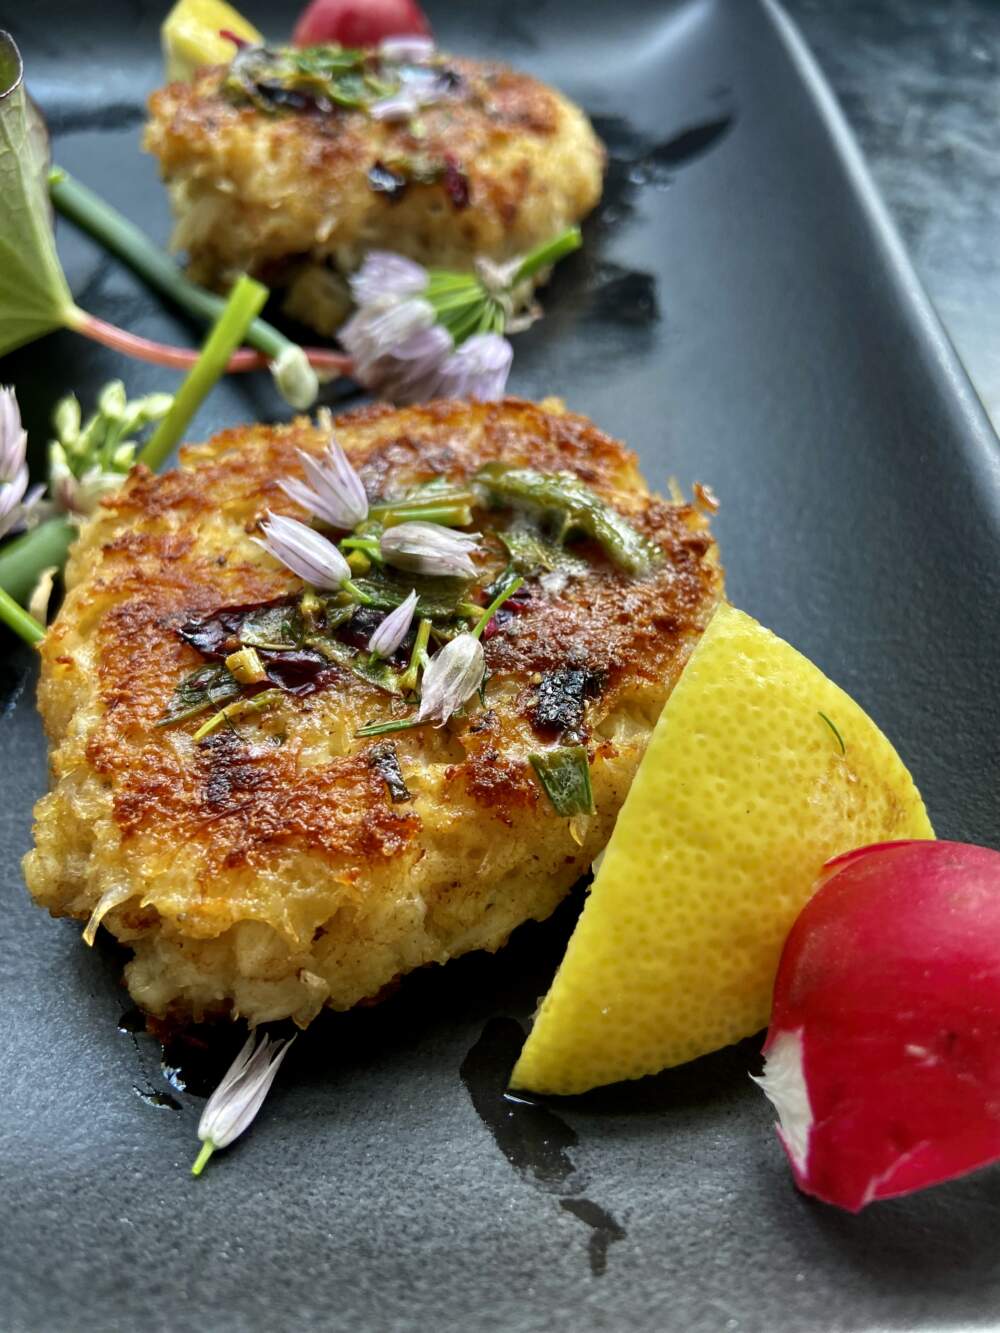 Crab cakes with herb butter. (Kathy Gunst/Here & Now)